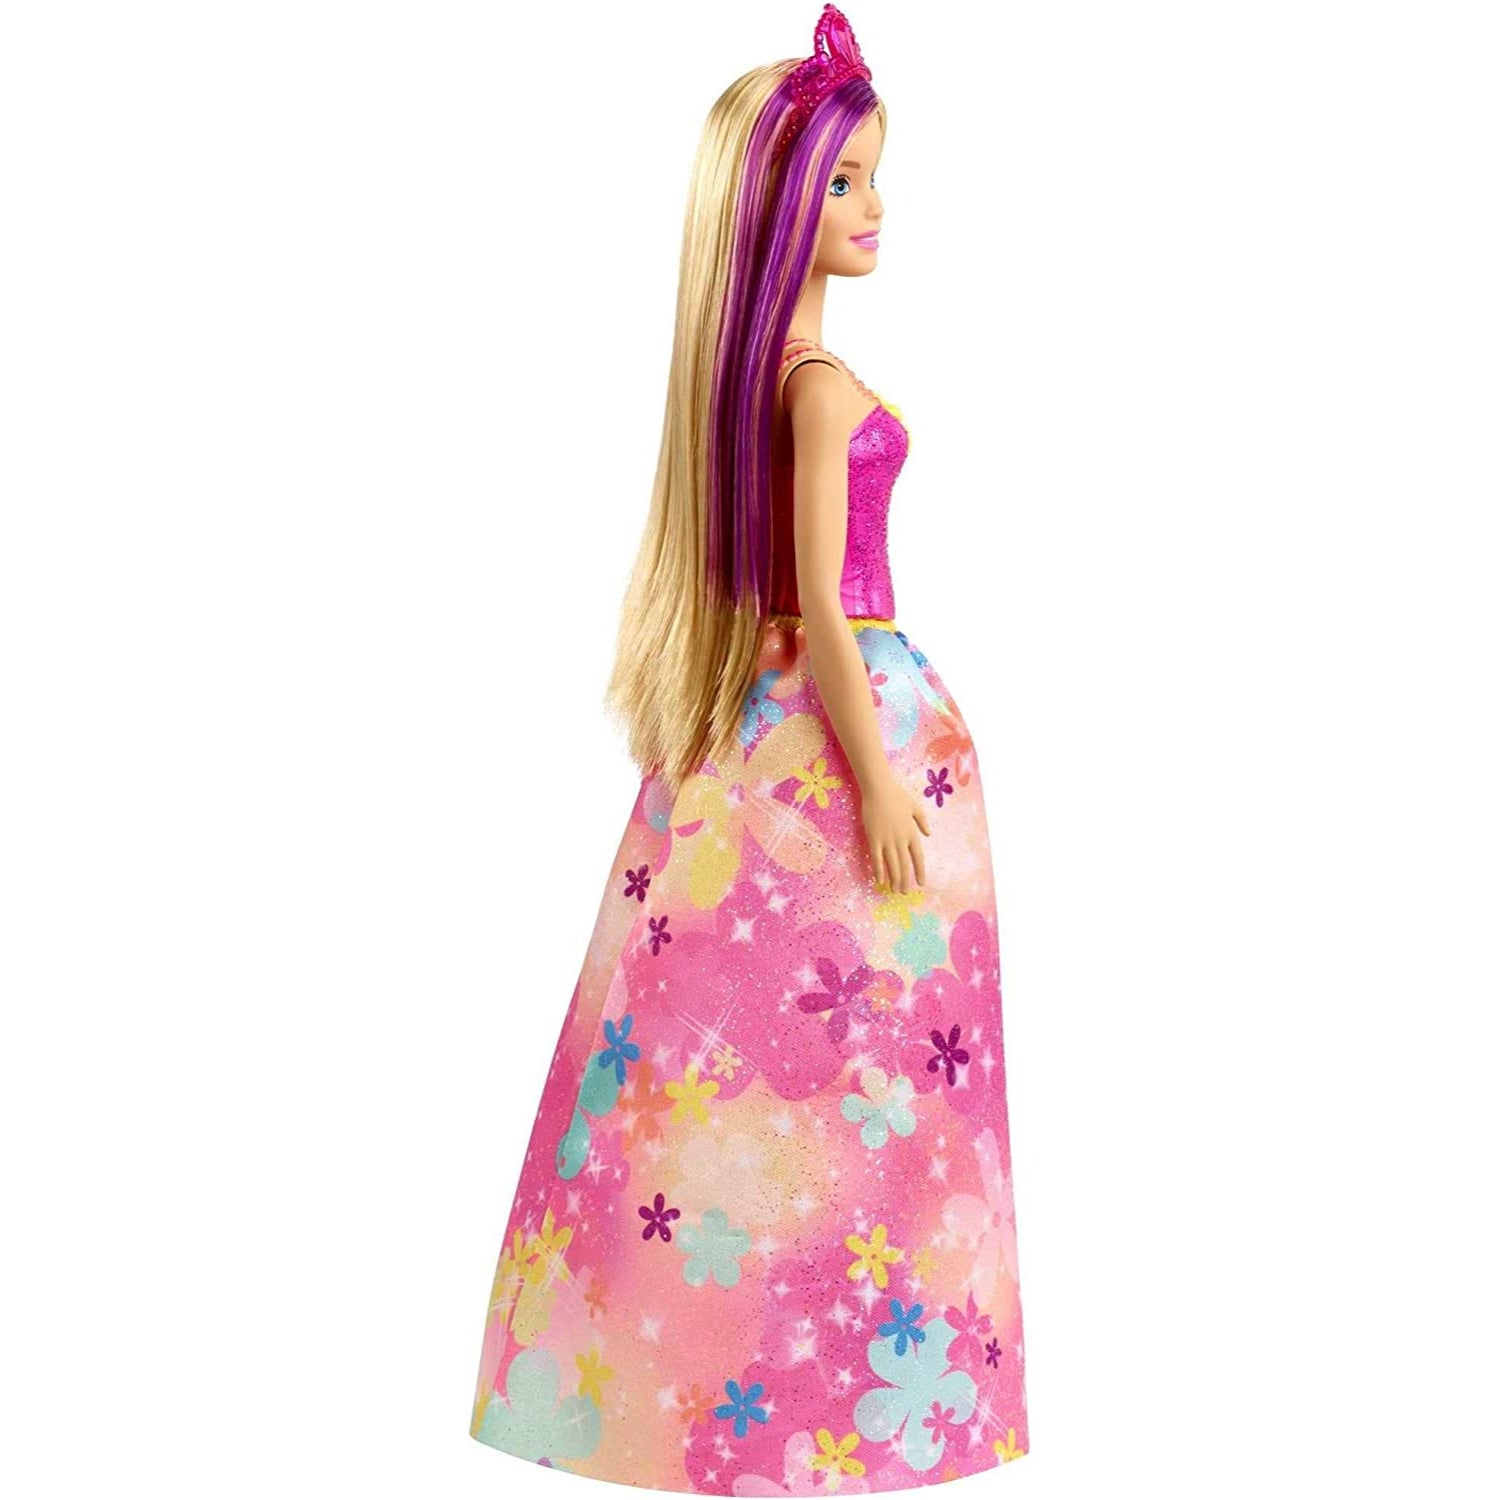 Barbie Dreamtopia Princess Doll, 12-Inch, Brunette with Pink